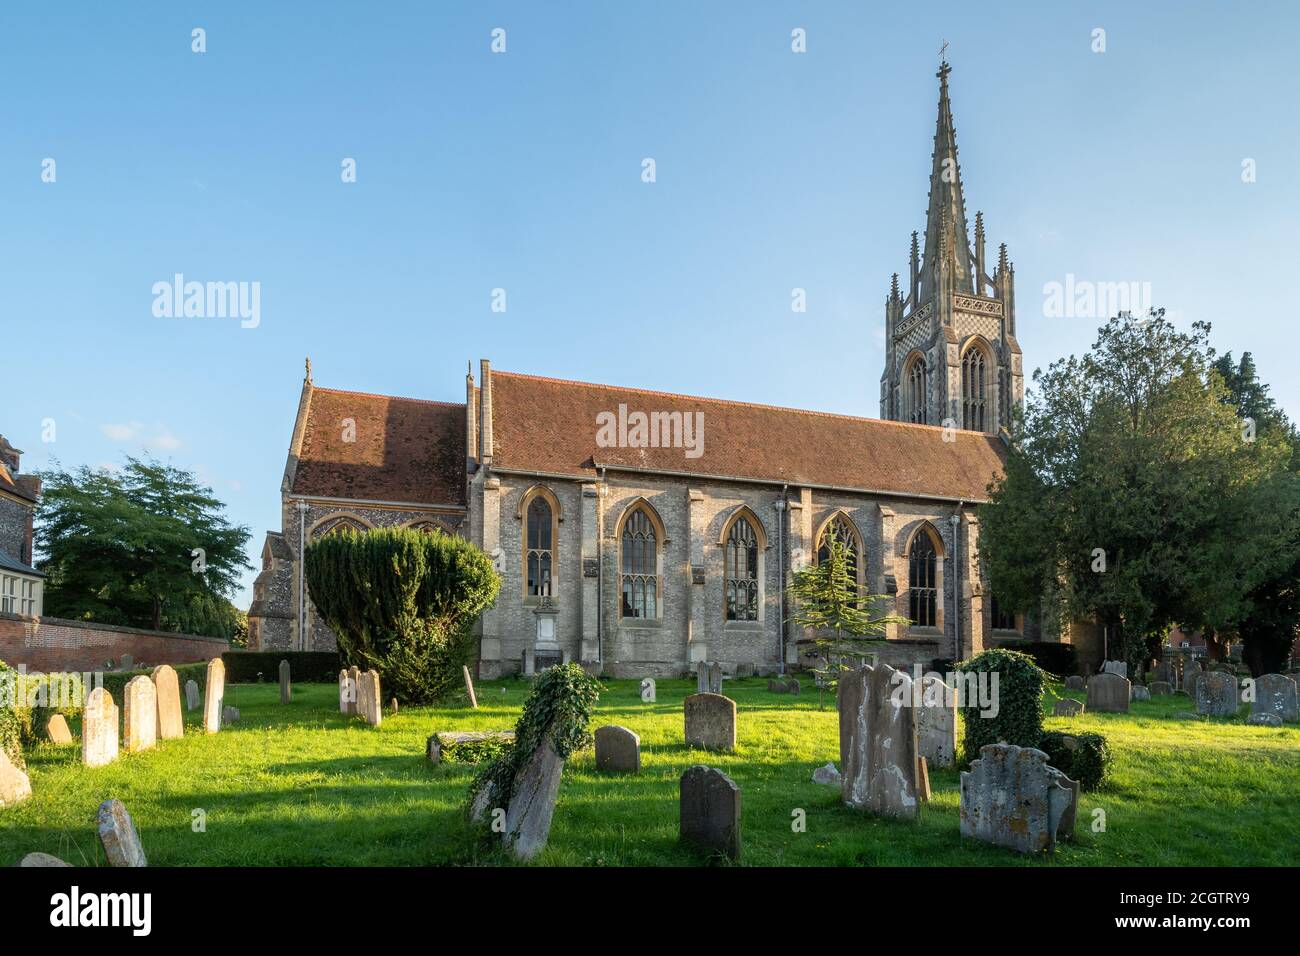 All Saints Church in Marlow, a picturesque market town in Buckinghamshire, England, UK, on the River Thames Stock Photo